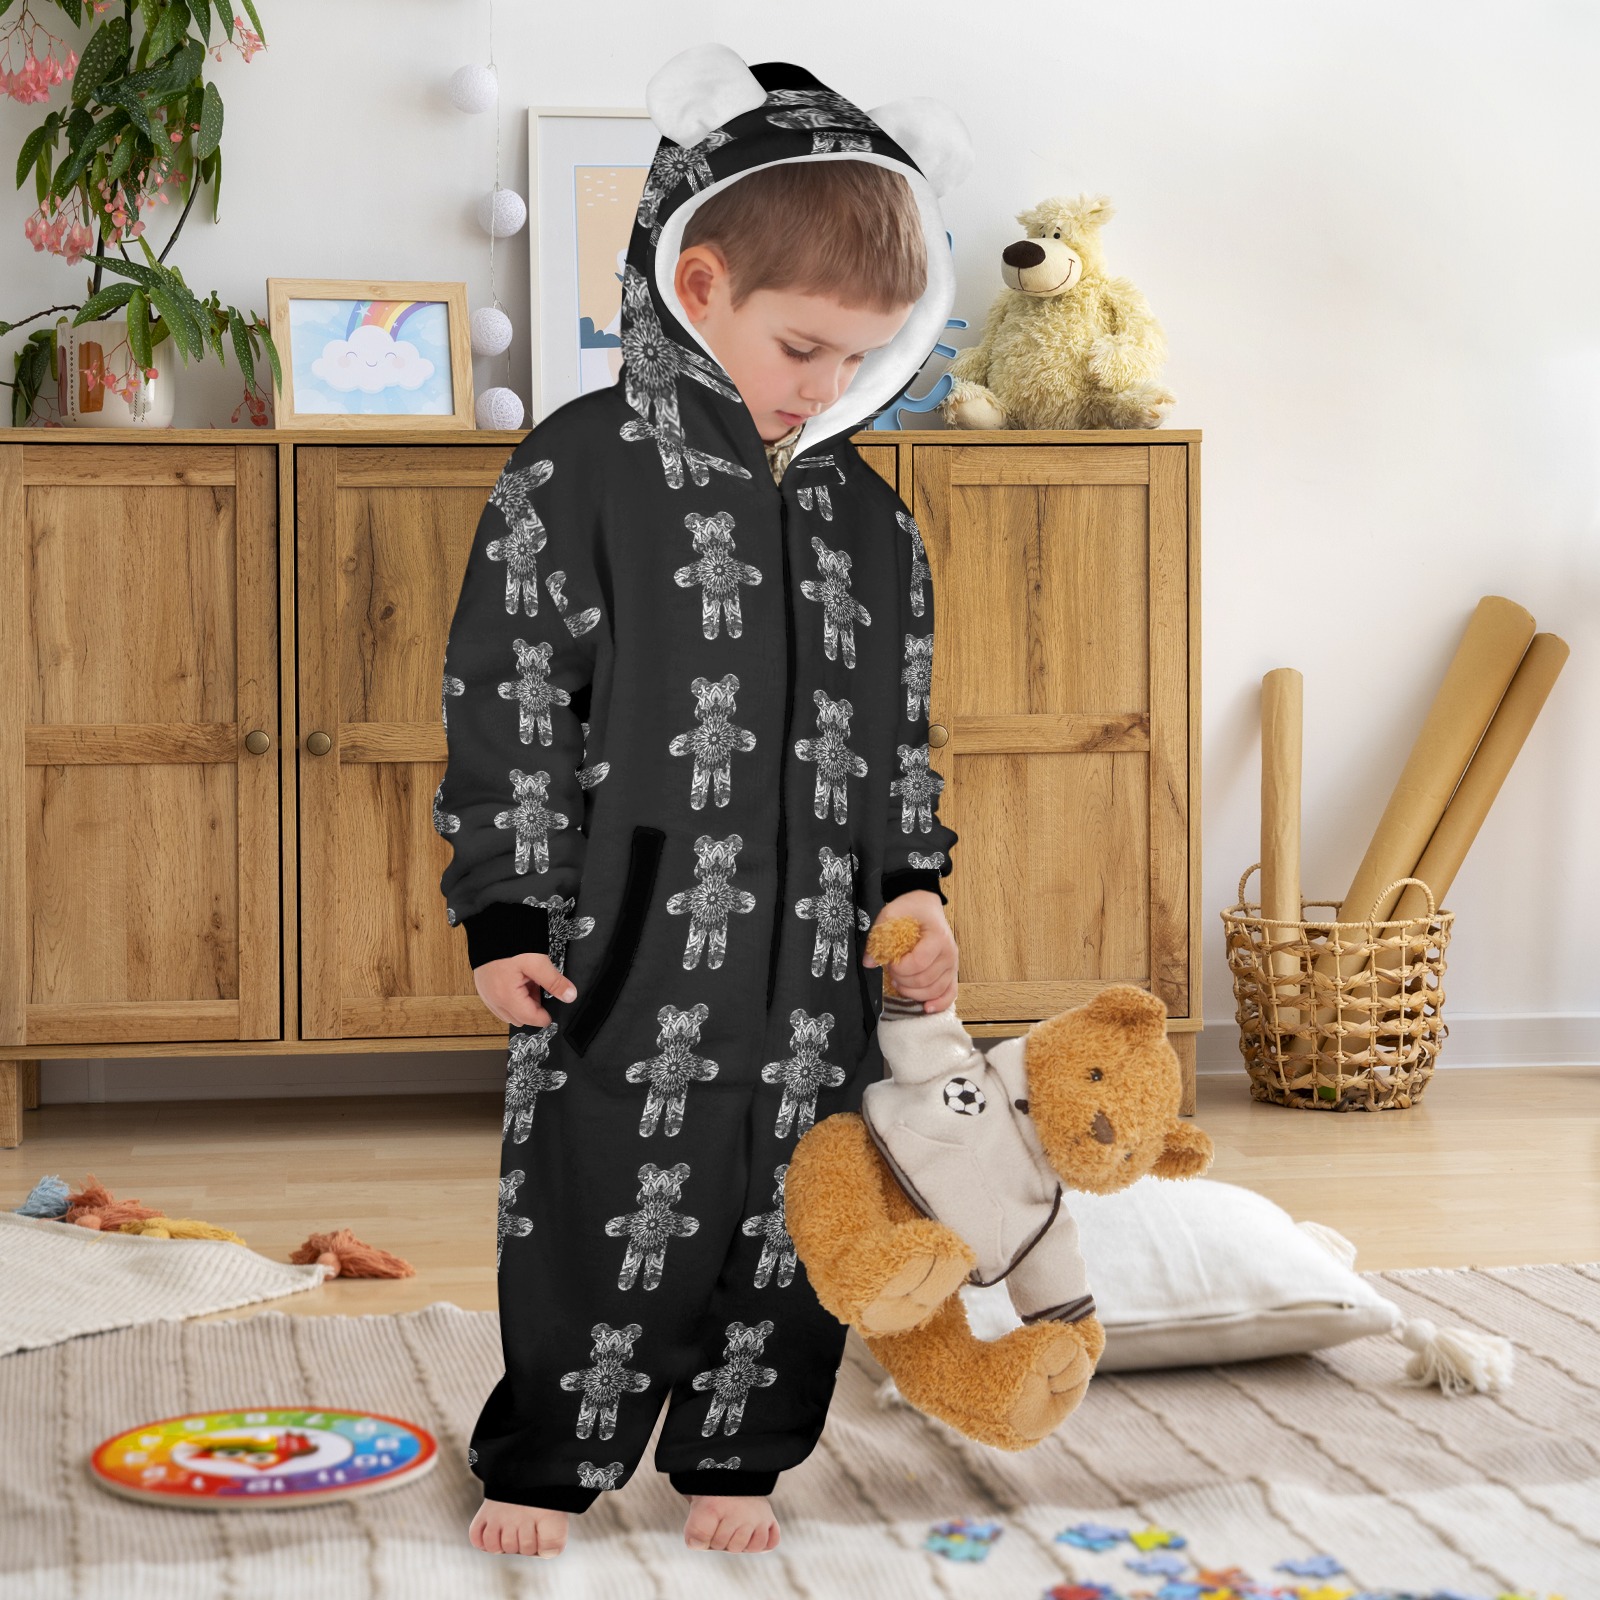 nounours 1g One-Piece Zip up Hooded Pajamas for Little Kids